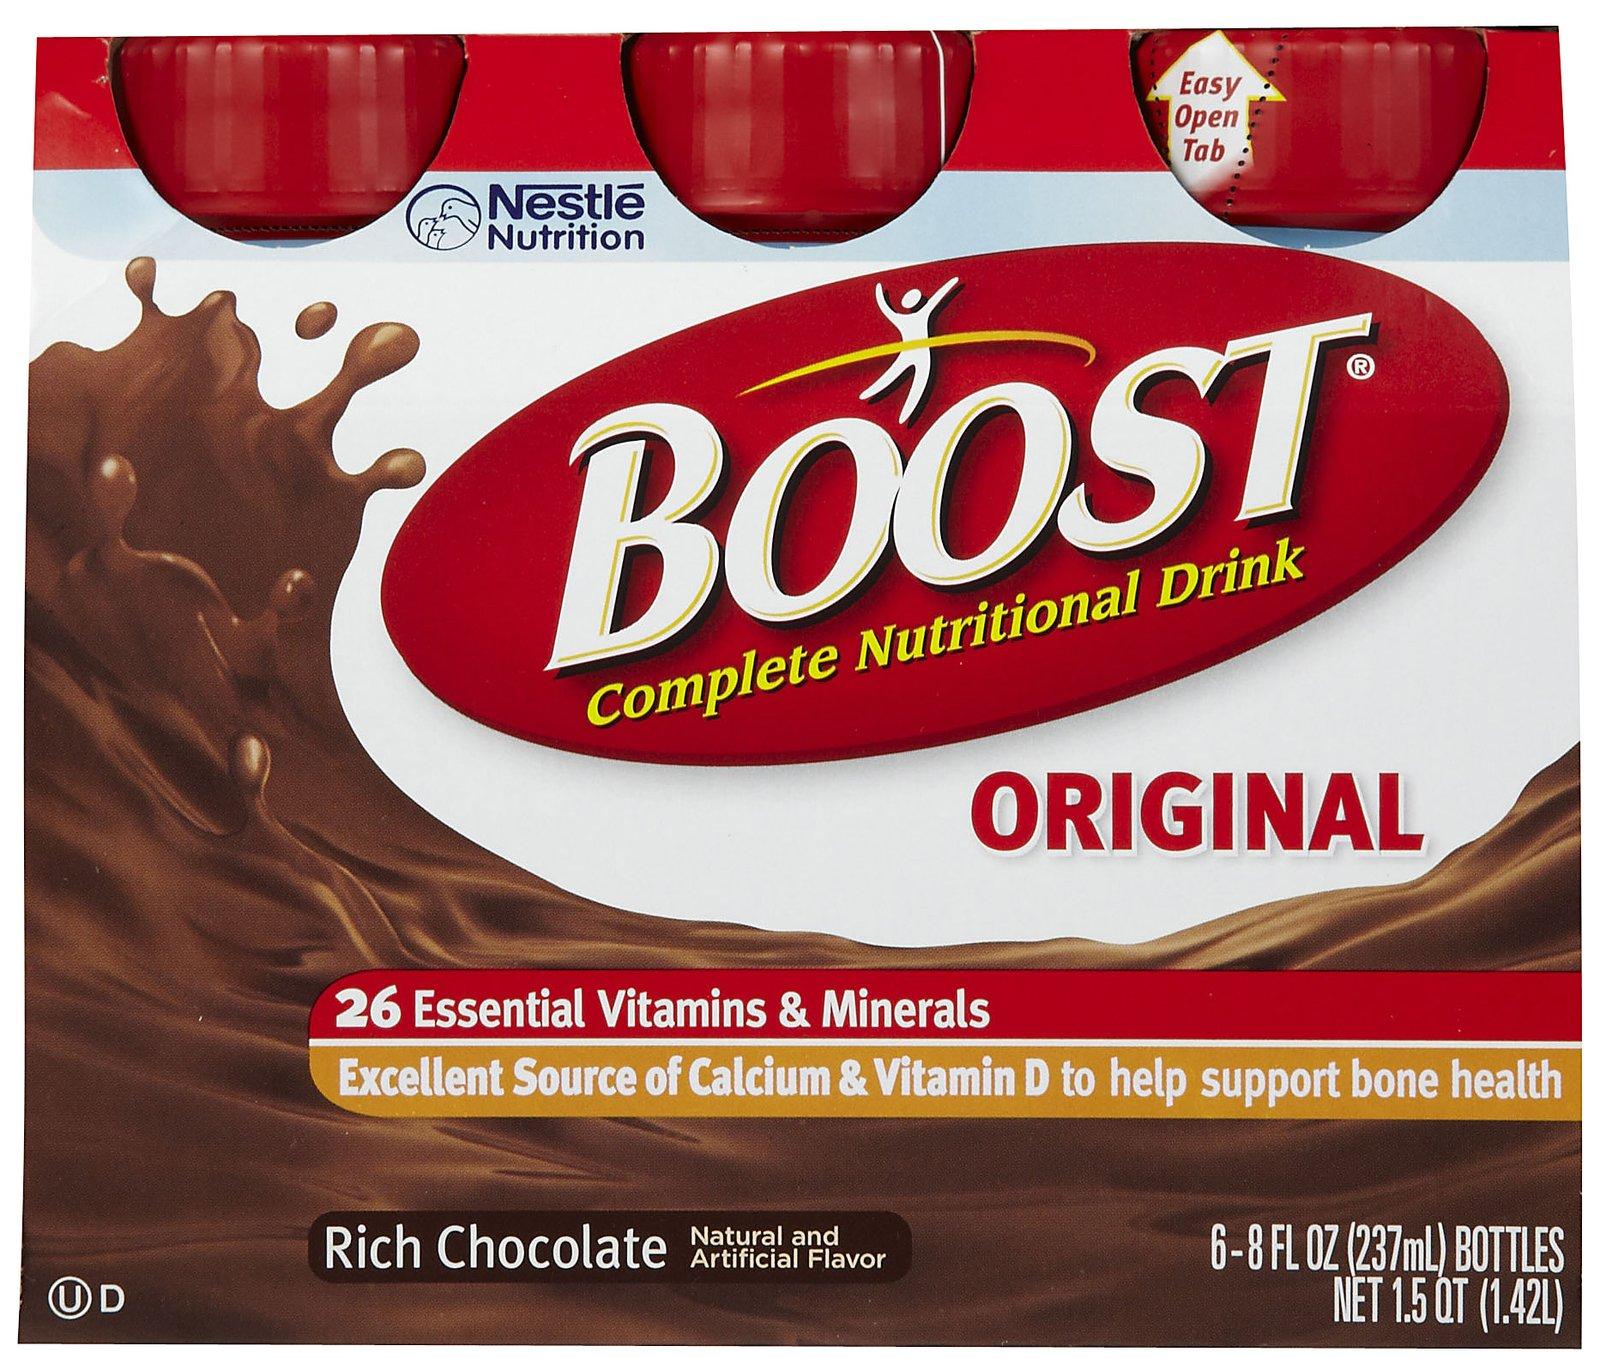 Boost Drink Logo - New $2.50/1 Boost Nutritional Drink Coupon & More!! - Sexy Saving